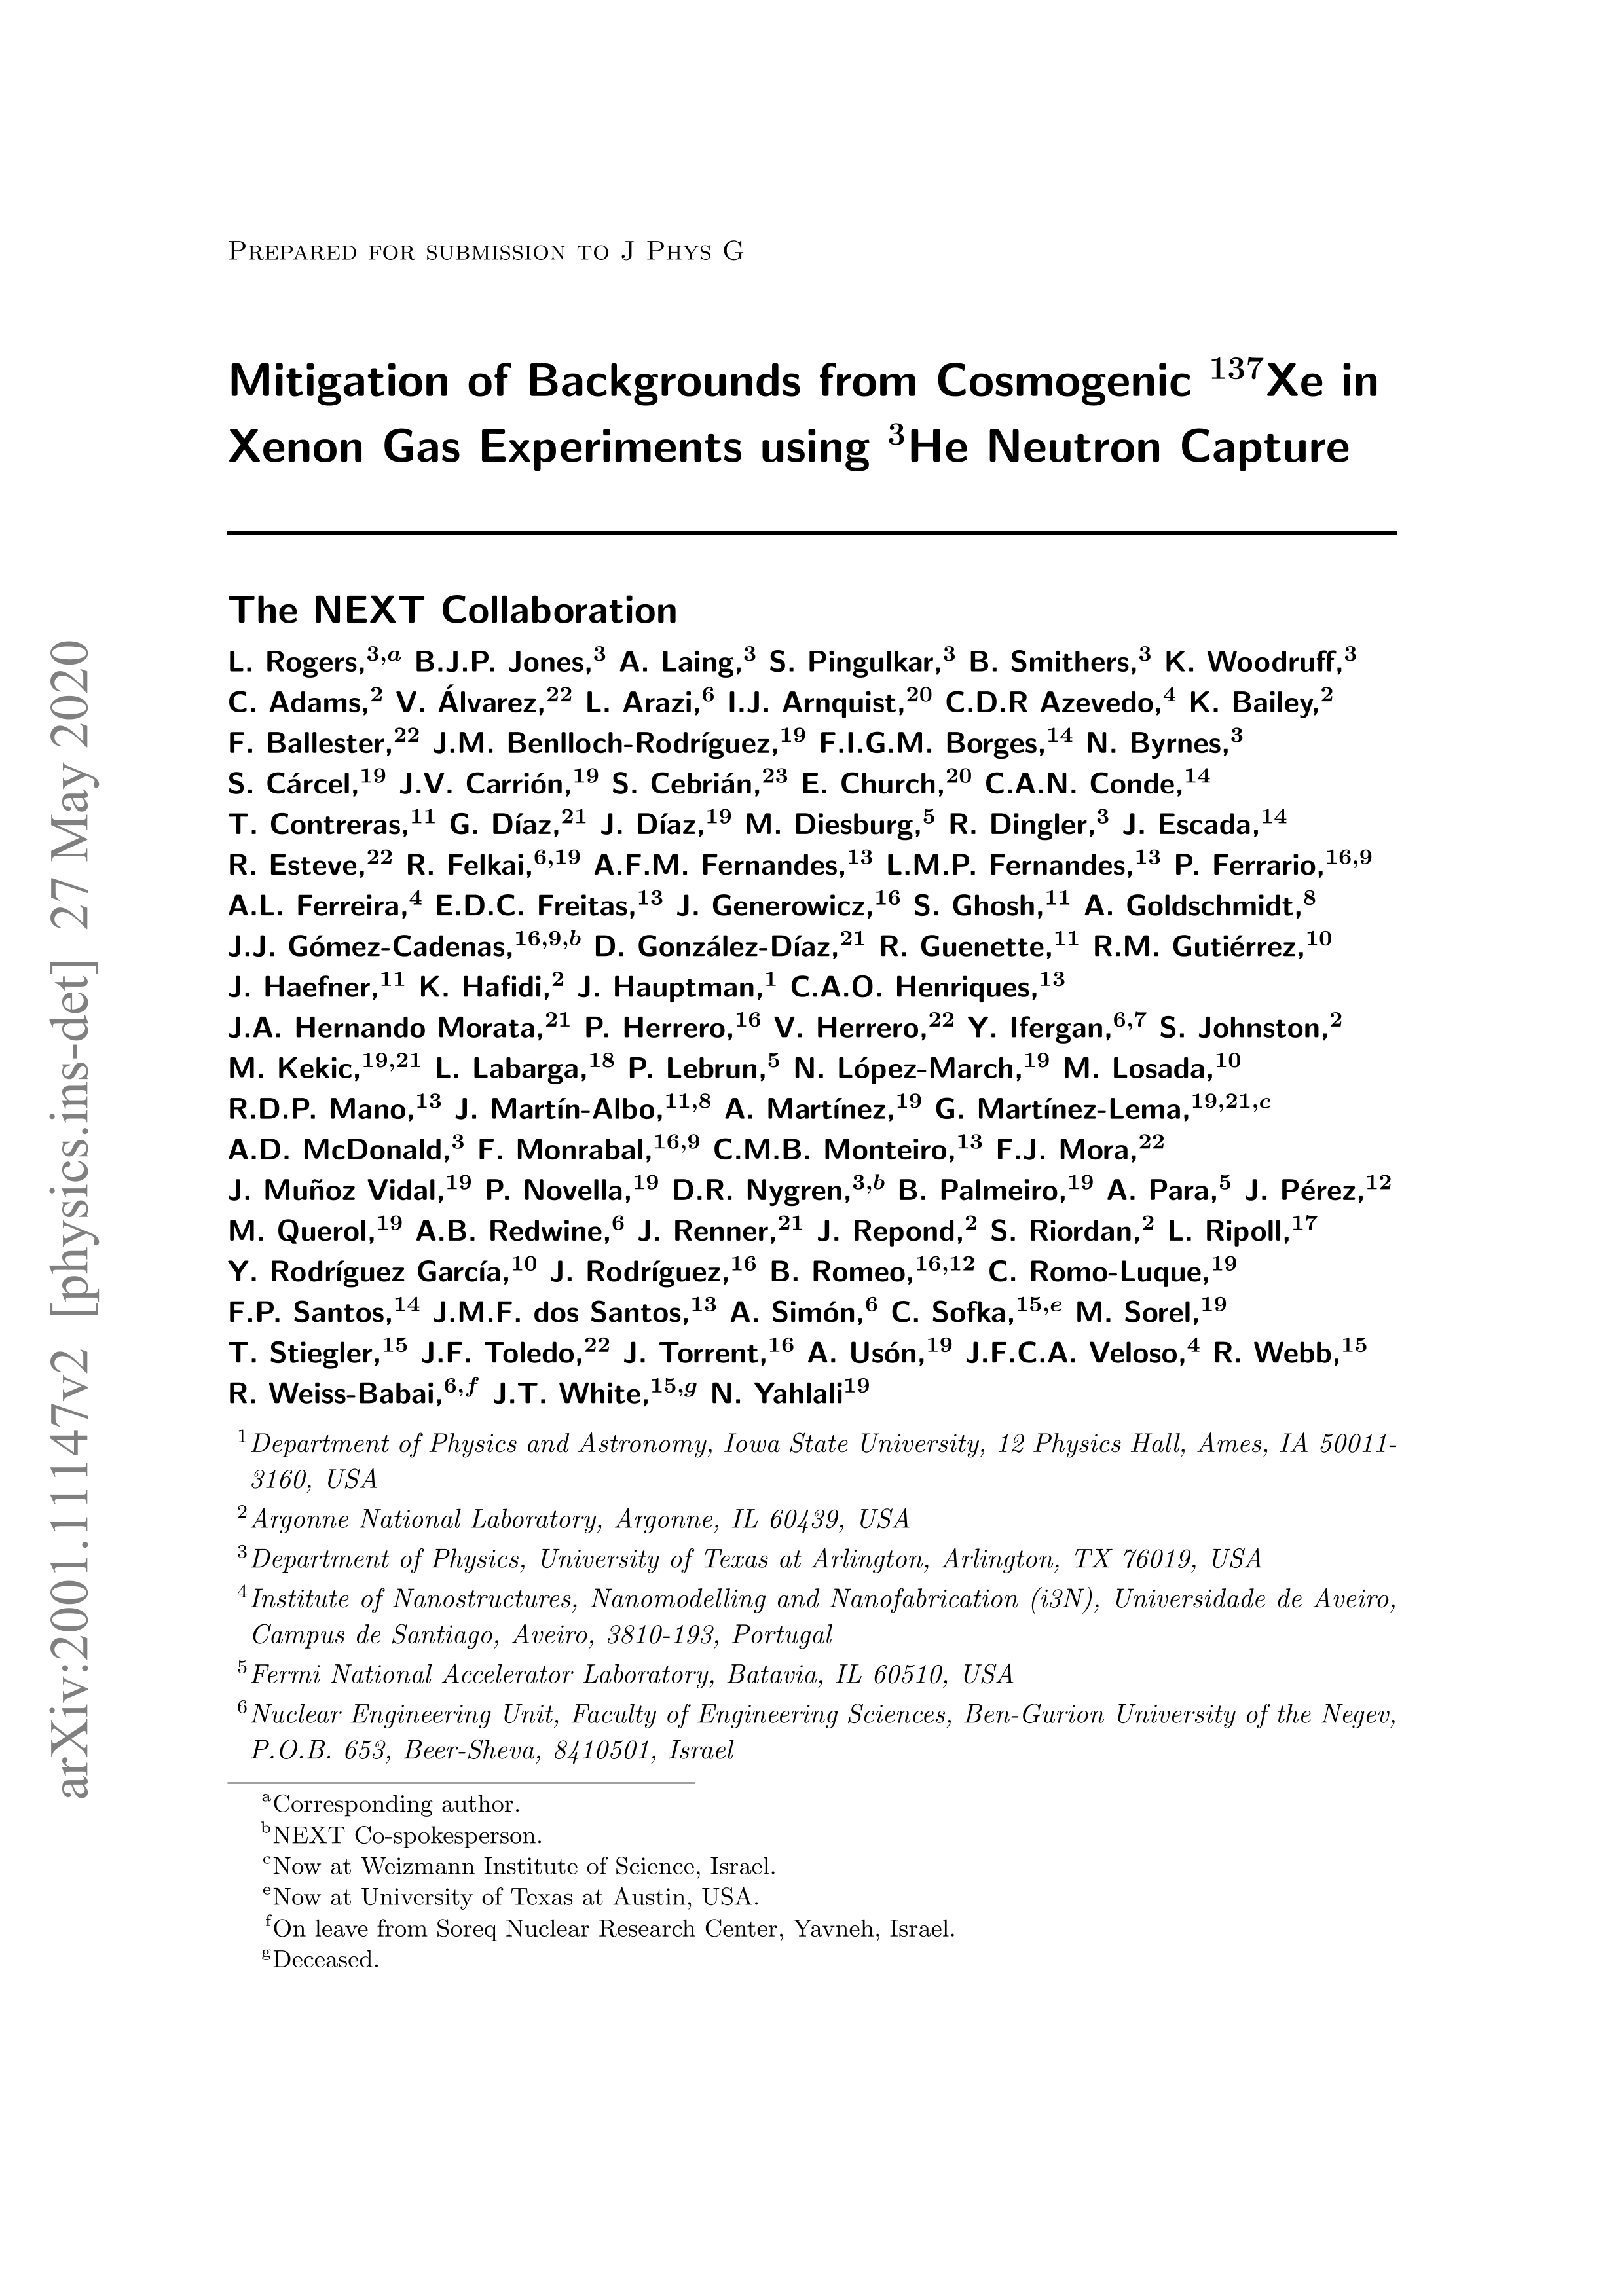 Mitigation of backgrounds from cosmogenic 137Xe in xenon gas experiments using 3He neutron capture